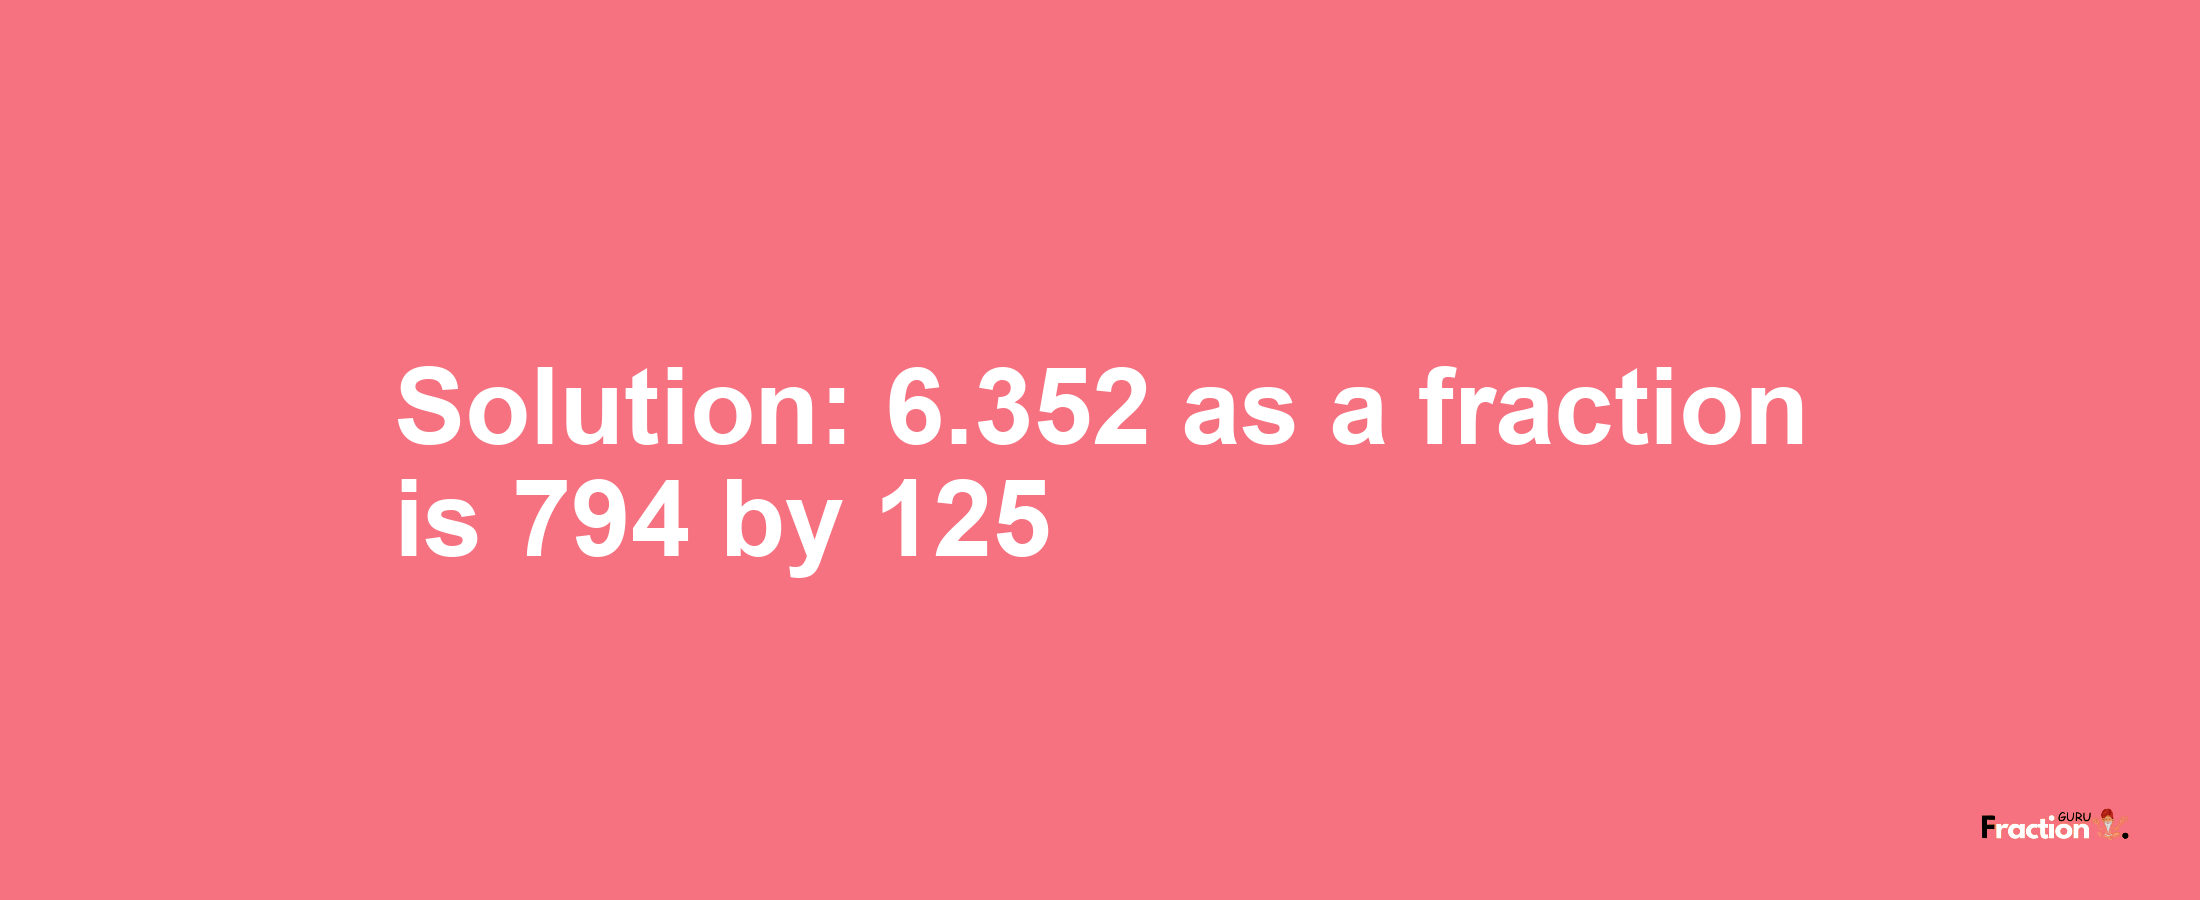 Solution:6.352 as a fraction is 794/125